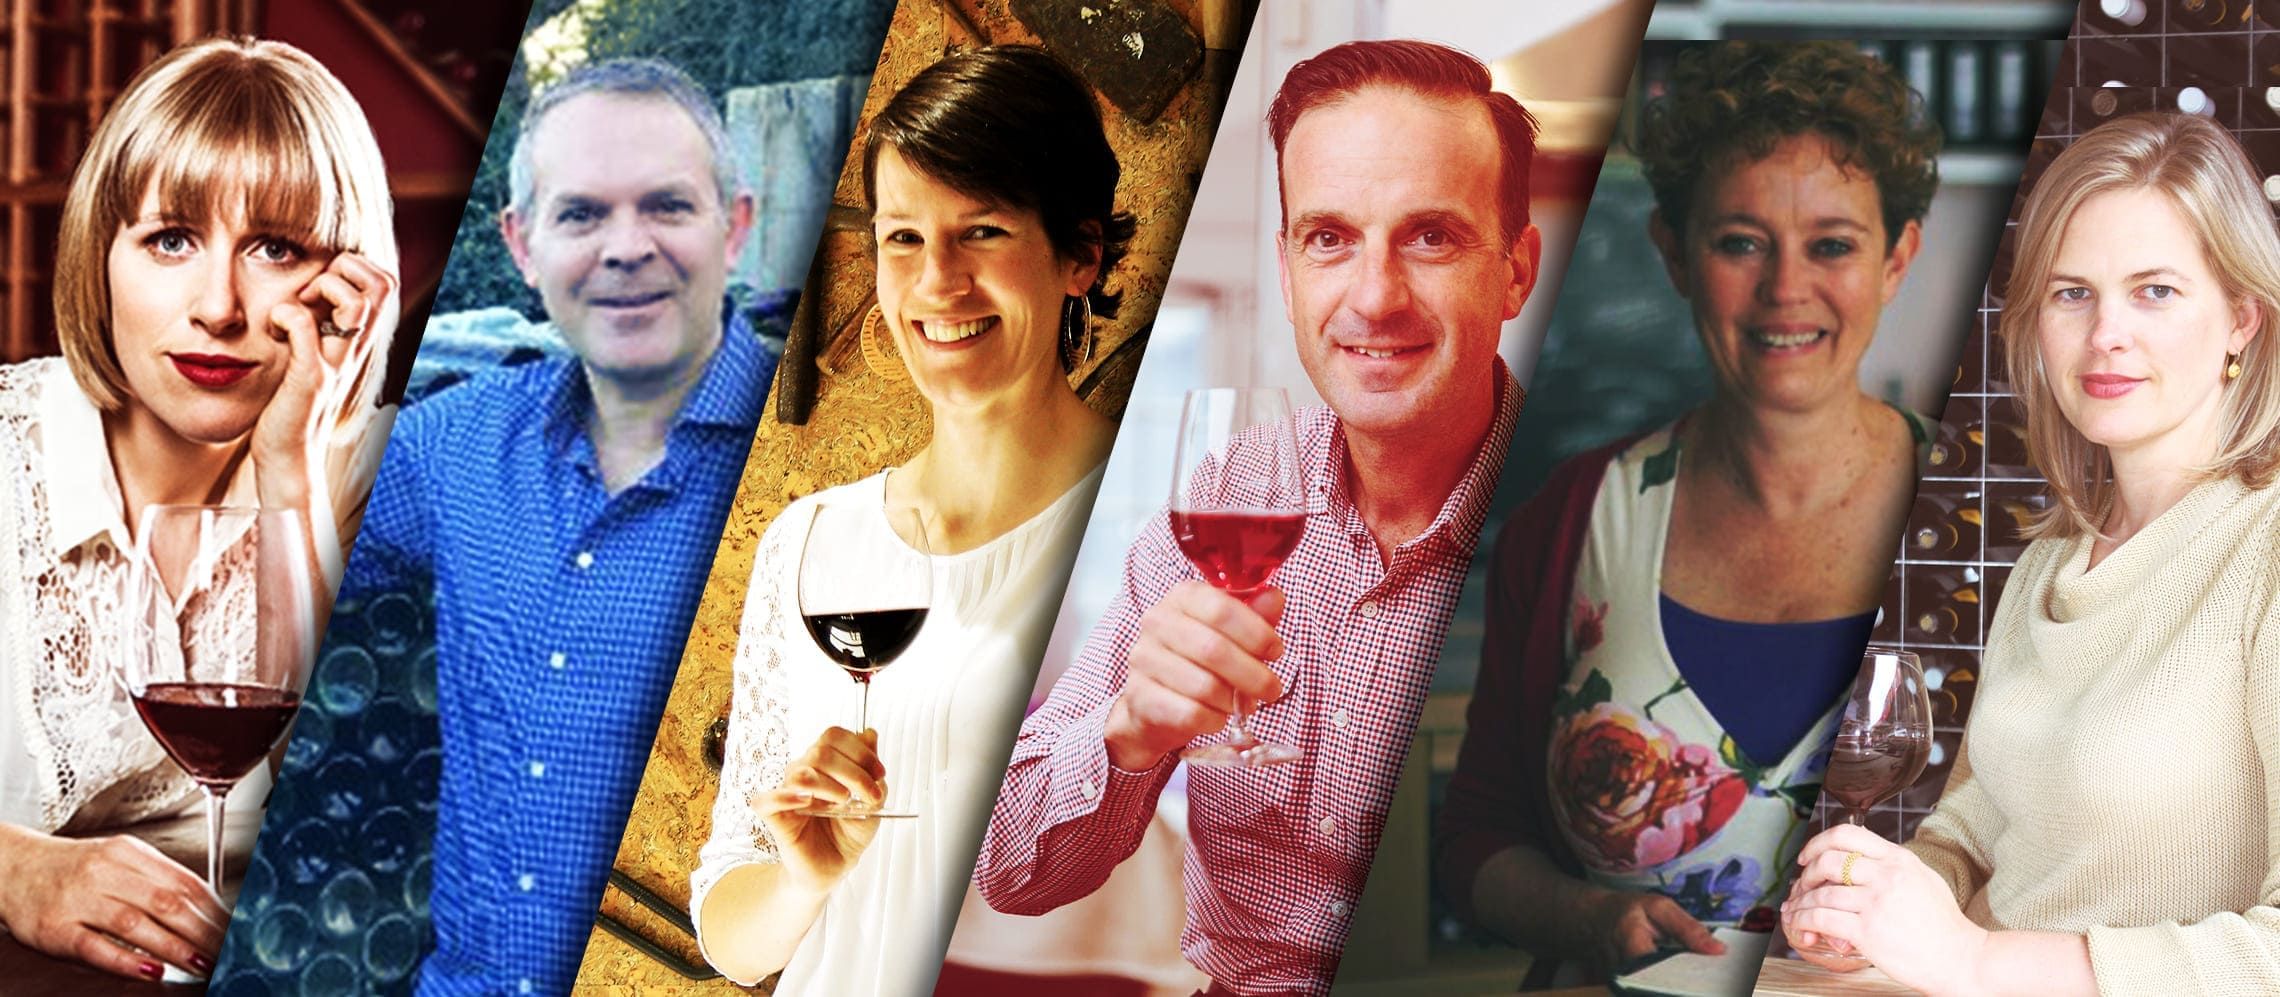 Photo for: 6 New Masters of Wine Added to 2019 London Wine Competition Judging Panel